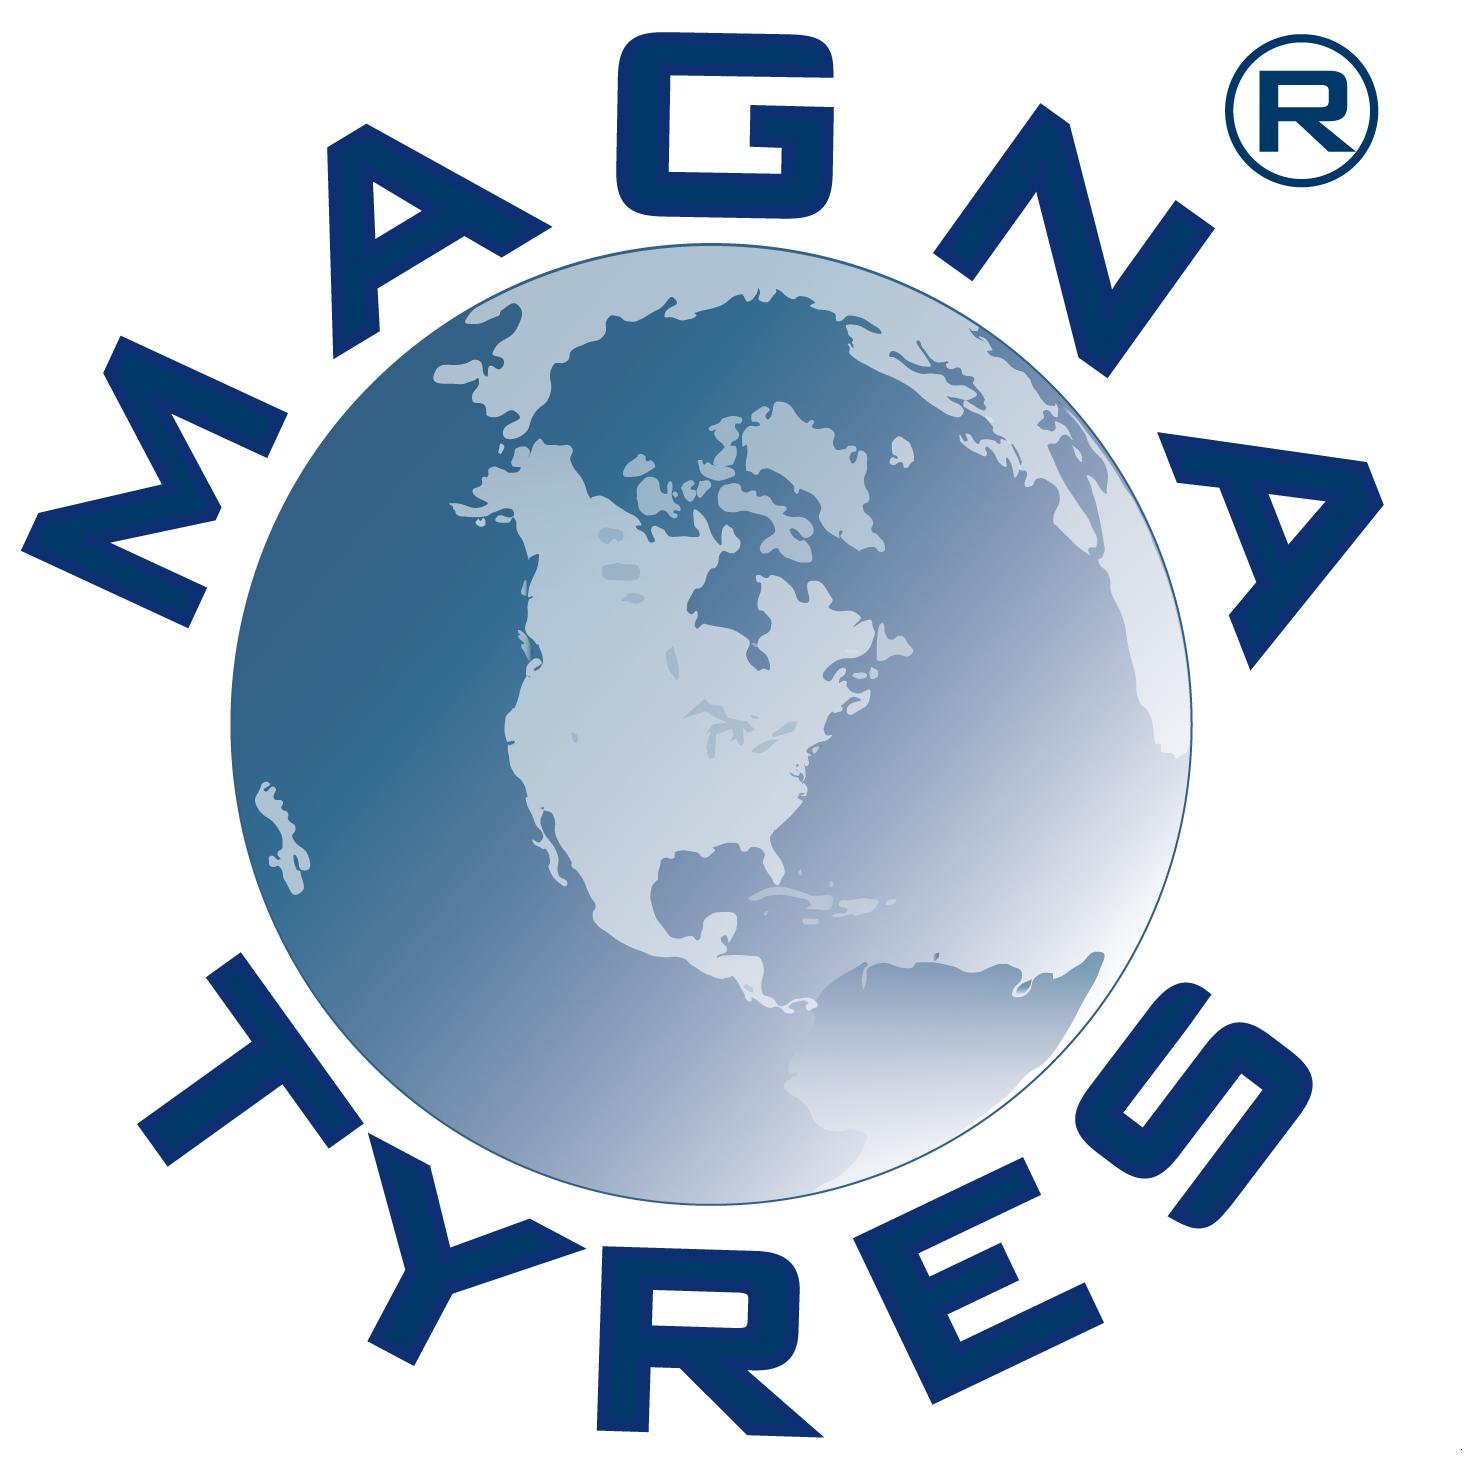 Magna Tyres says it is seeing increasing demand for its products in Eastern Europe